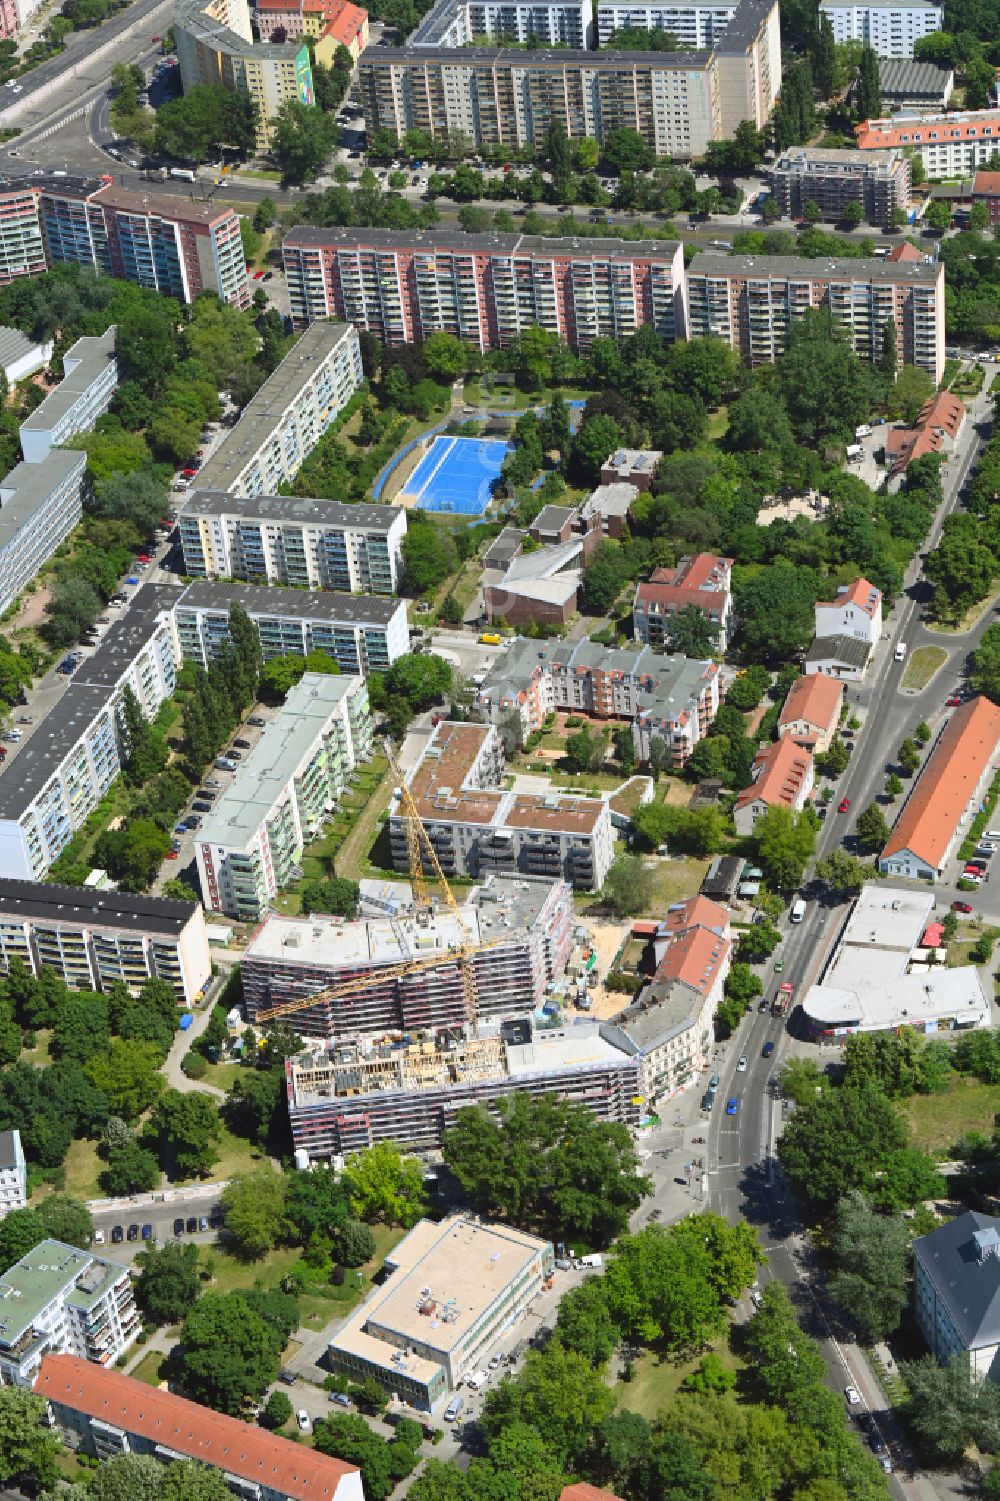 Aerial image Berlin - Construction site for the multi-family residential building on Einbecker Strasse in the district Friedrichsfelde in Berlin, Germany